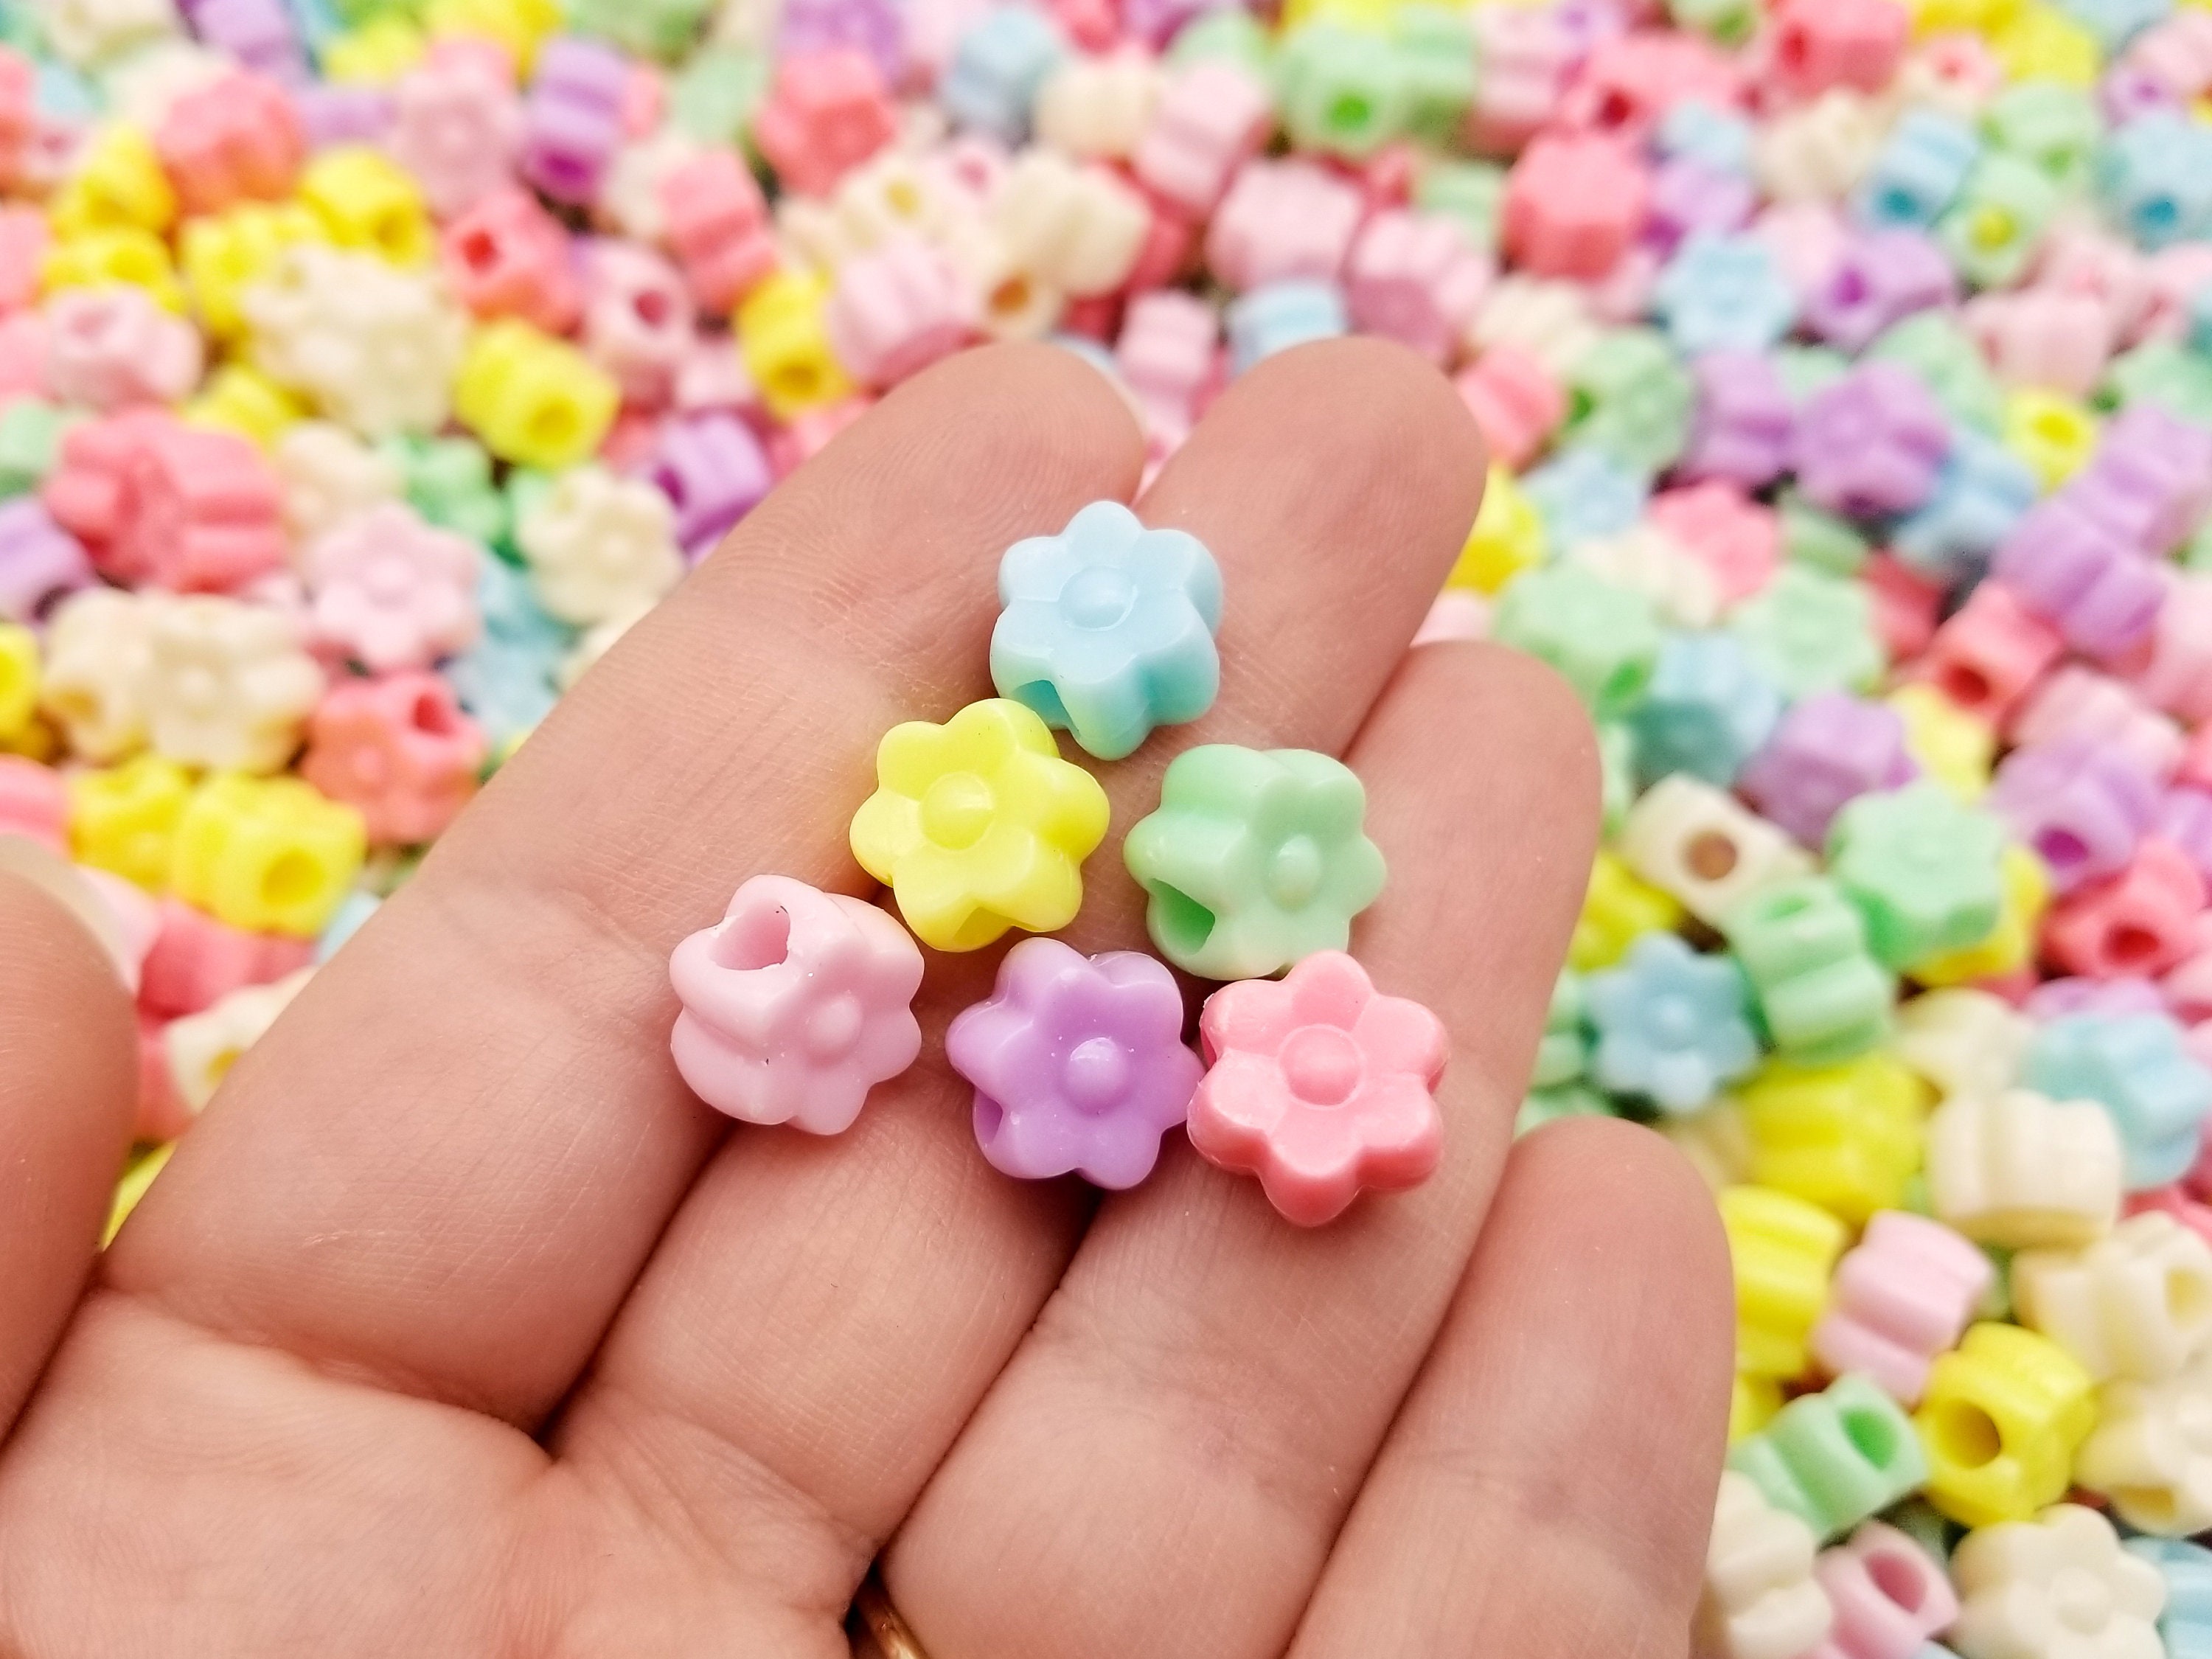 Cute Flower Beads, Translucent Beads, Clear Beads, Colorful Flower Beads,  14mm Beads, Flower Beads for Necklace, Beads for Bracelet